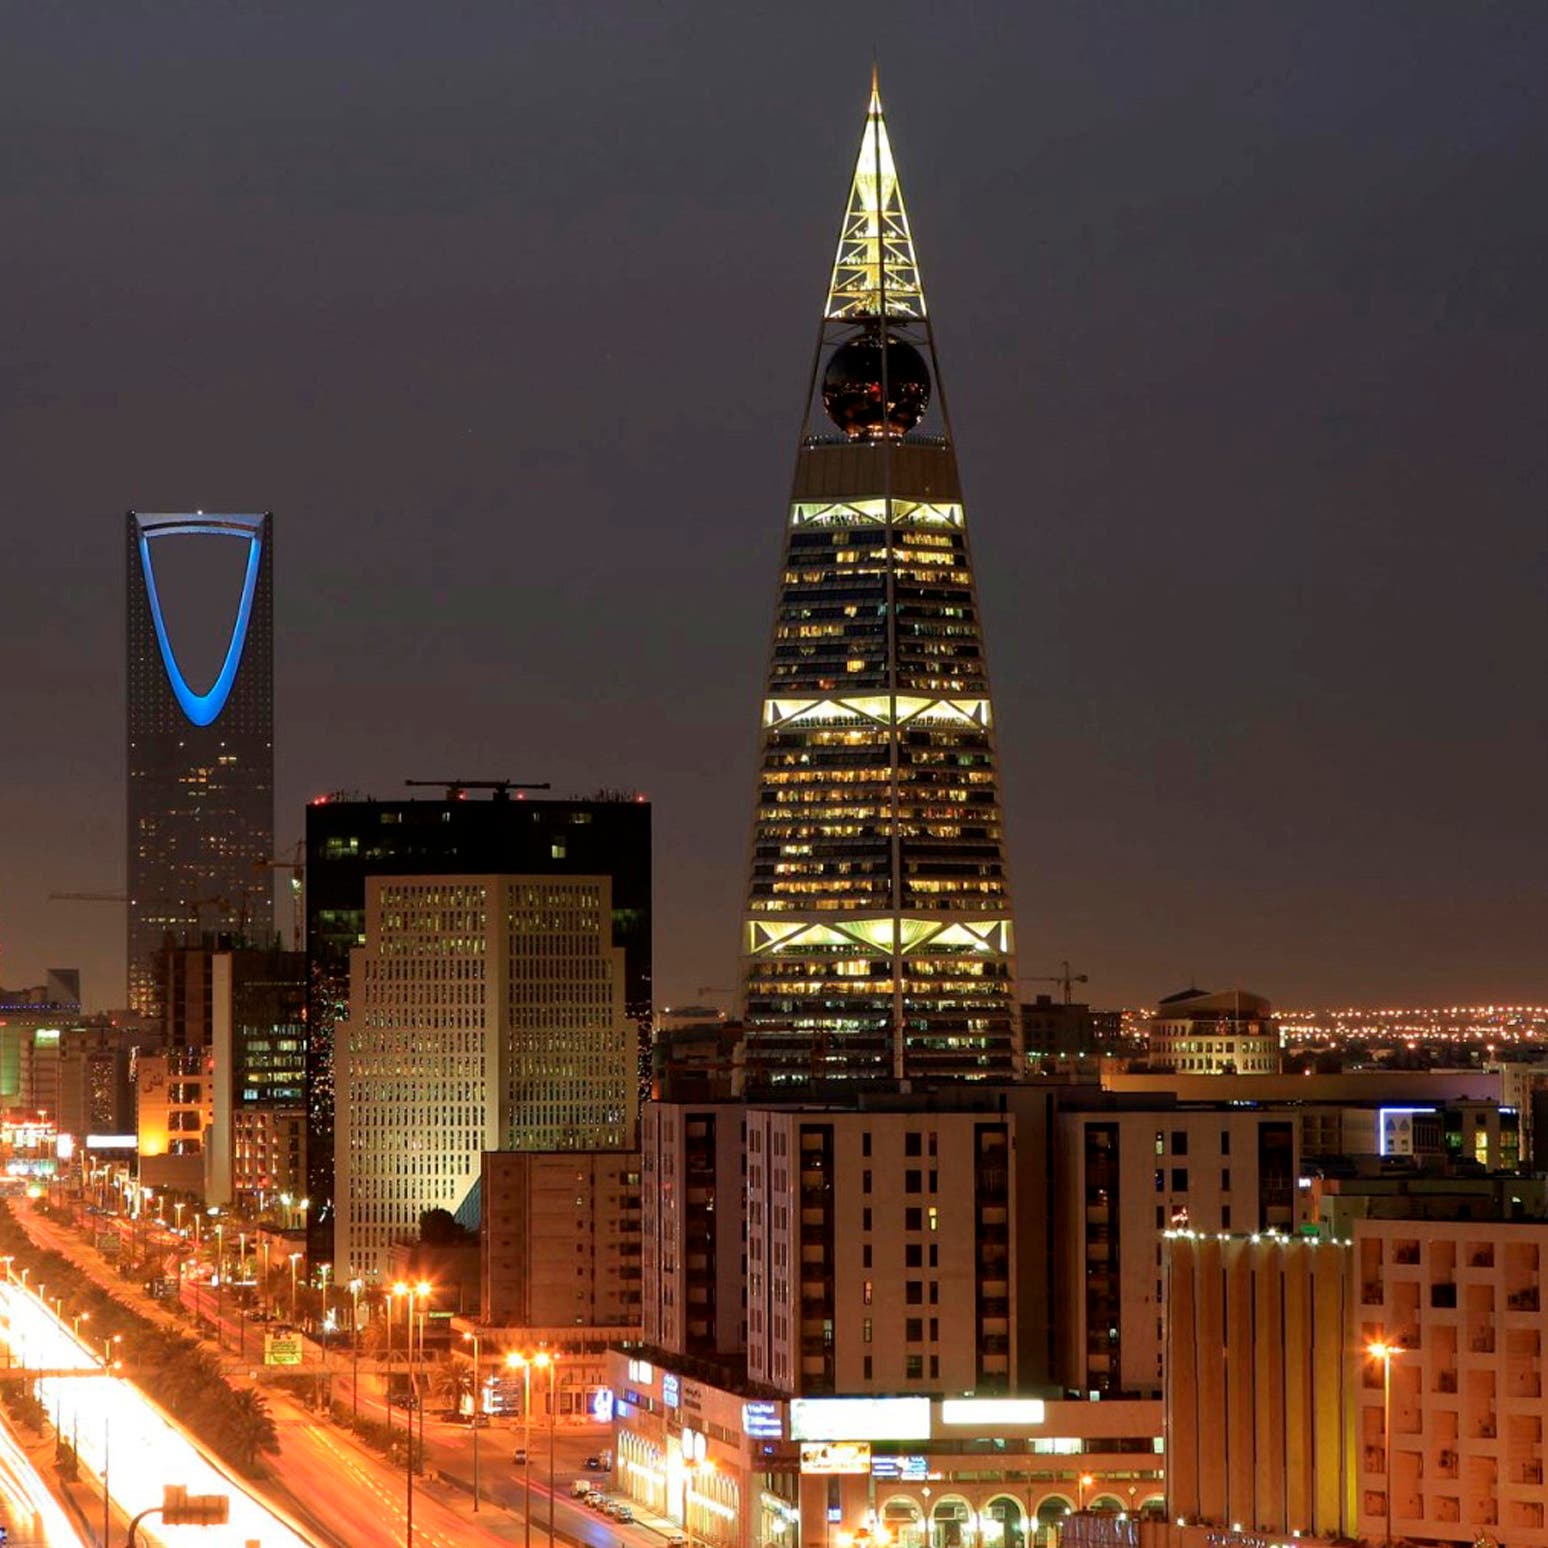 Saudi Arabia’s new tourism law allows citizens to rent out homes to tourists